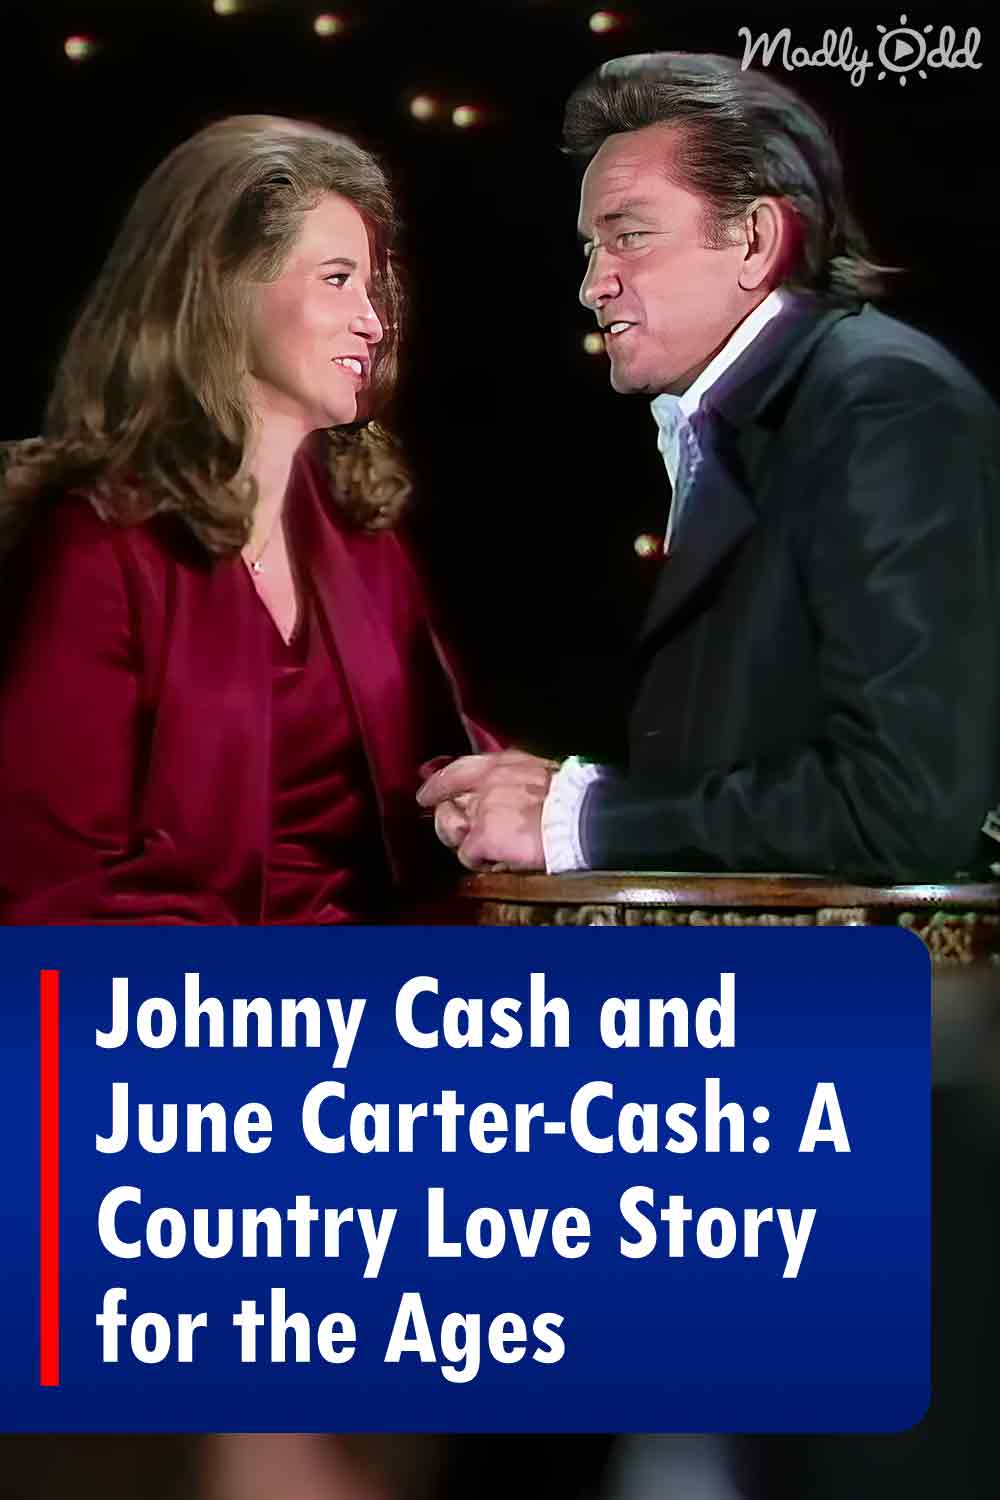 Johnny Cash and June Carter-Cash: A Country Love Story for the Ages